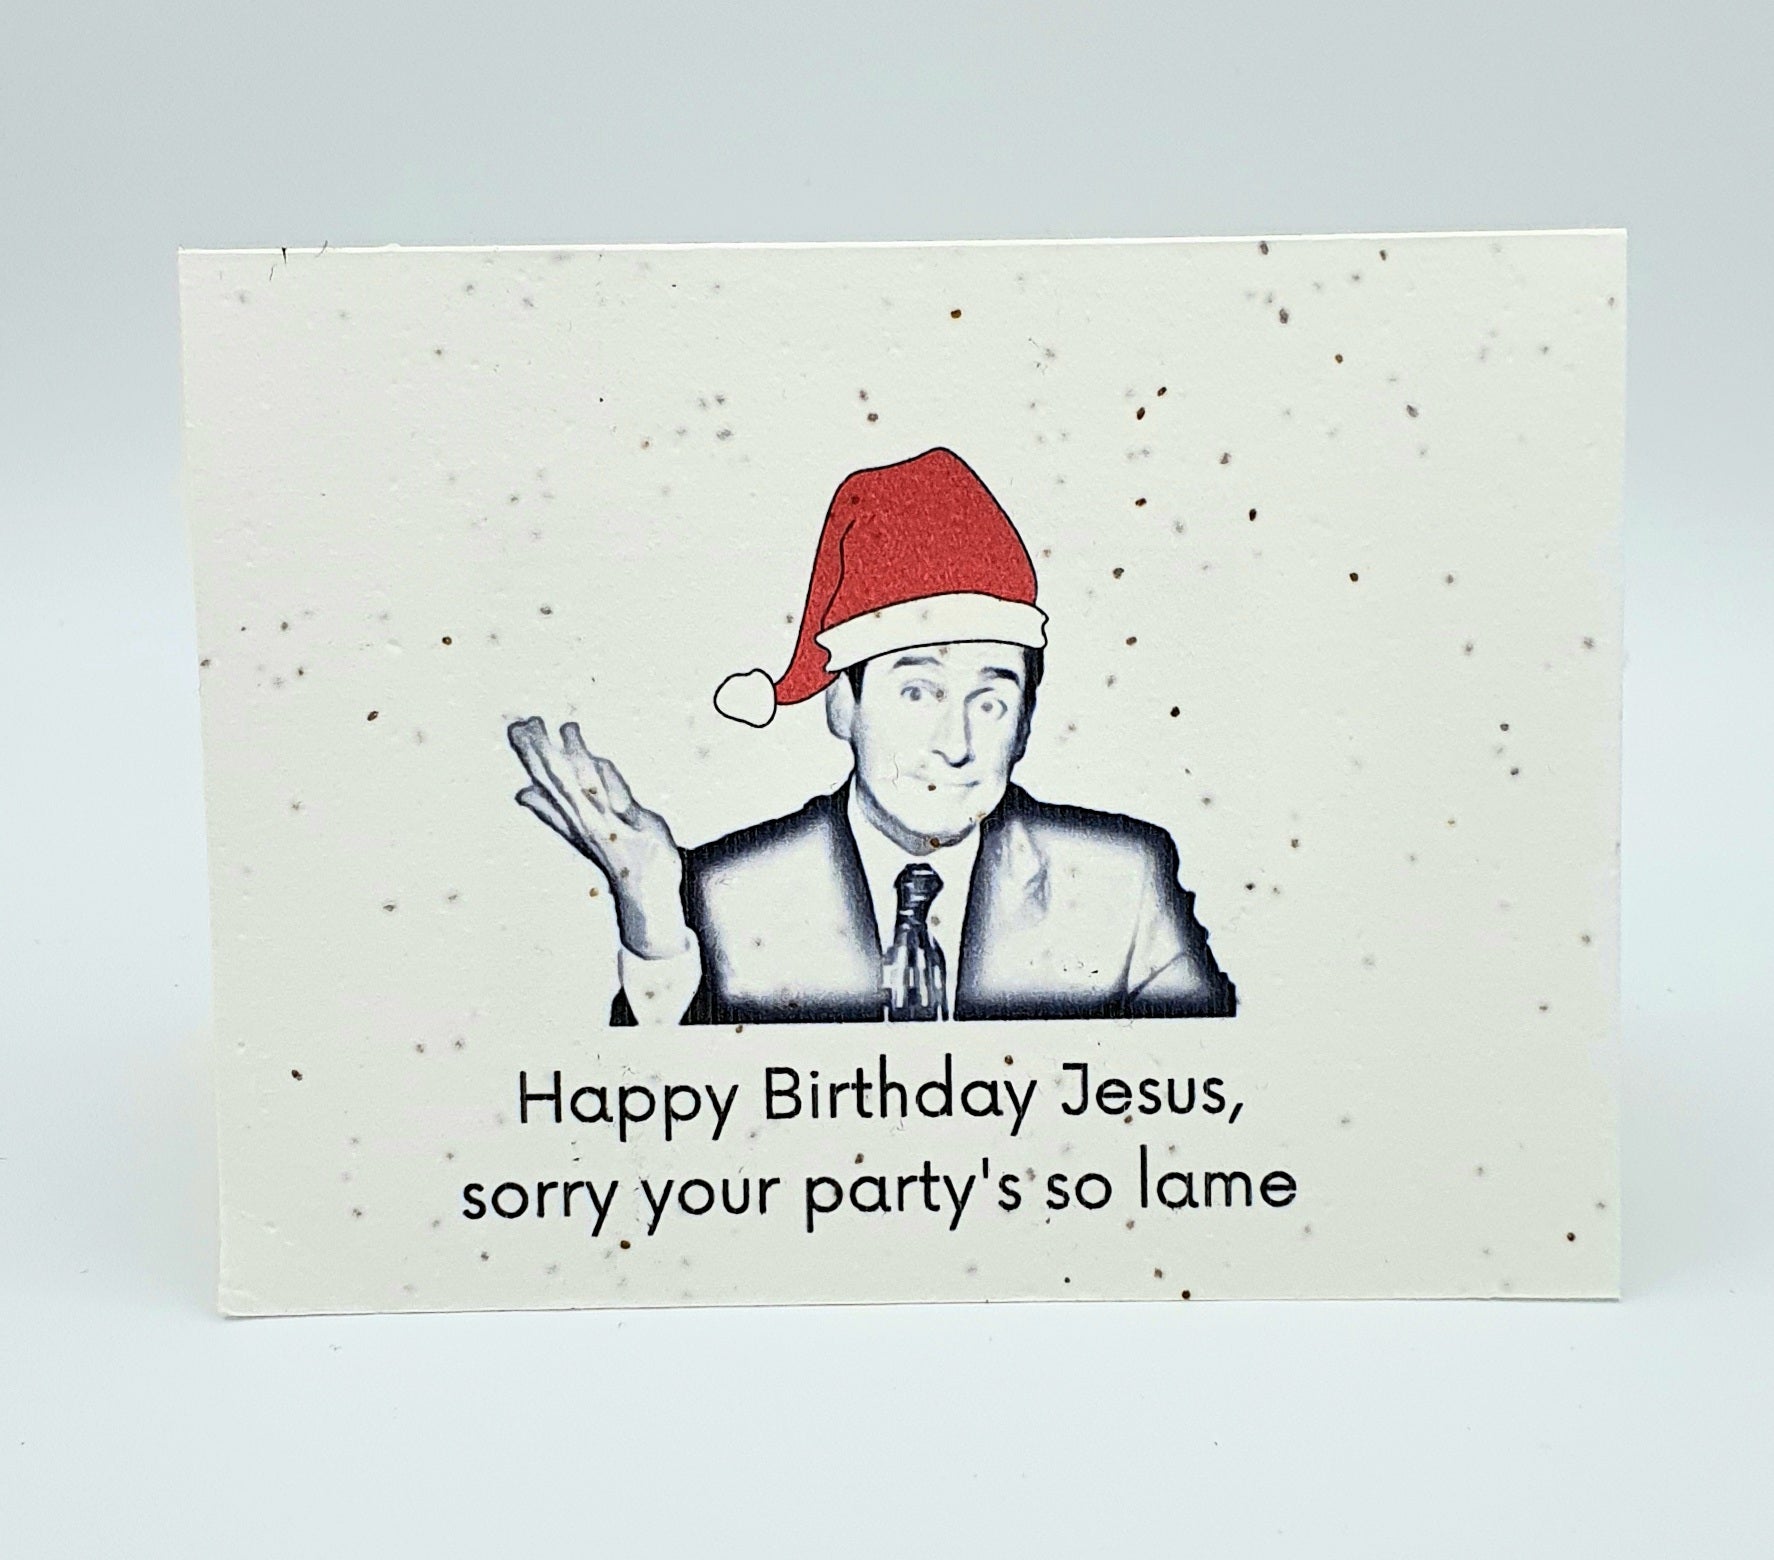 Plantable seed card with The Office Michael Scott with santa hat on "Happy Birthday Jesus, sorry your party's so lame."